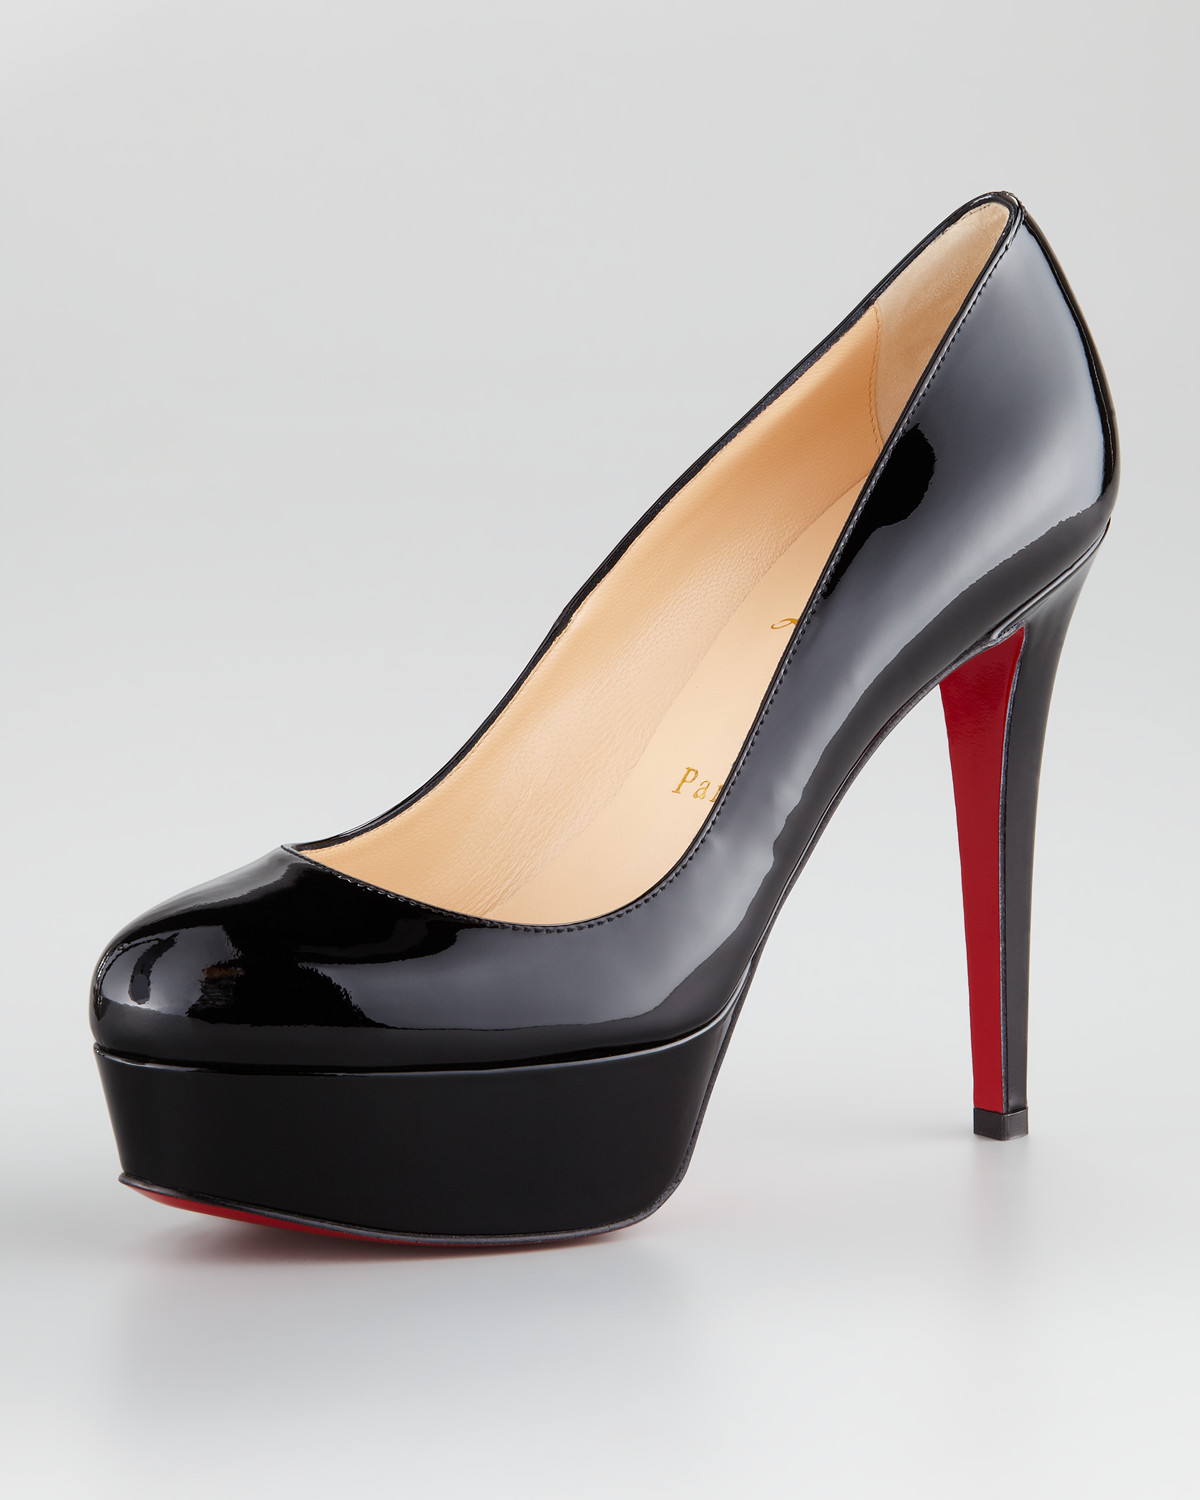 Louboutin – TheCobblers